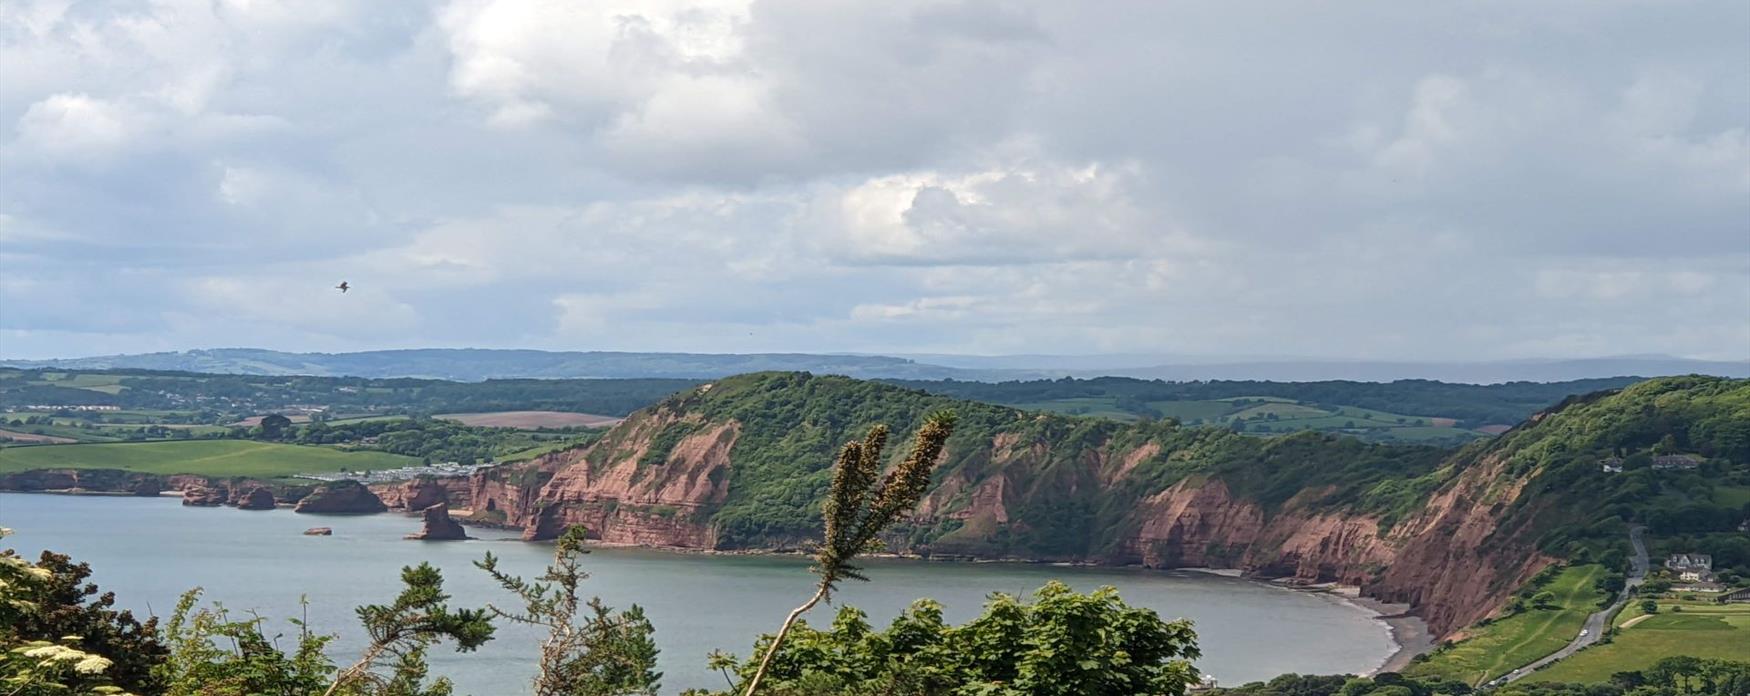 A sweeping image of the red sandstone cliffs of Sidmouth with Ladram Bay sea stacks visible in the distance. The sky has lots of clouds giving the image character.